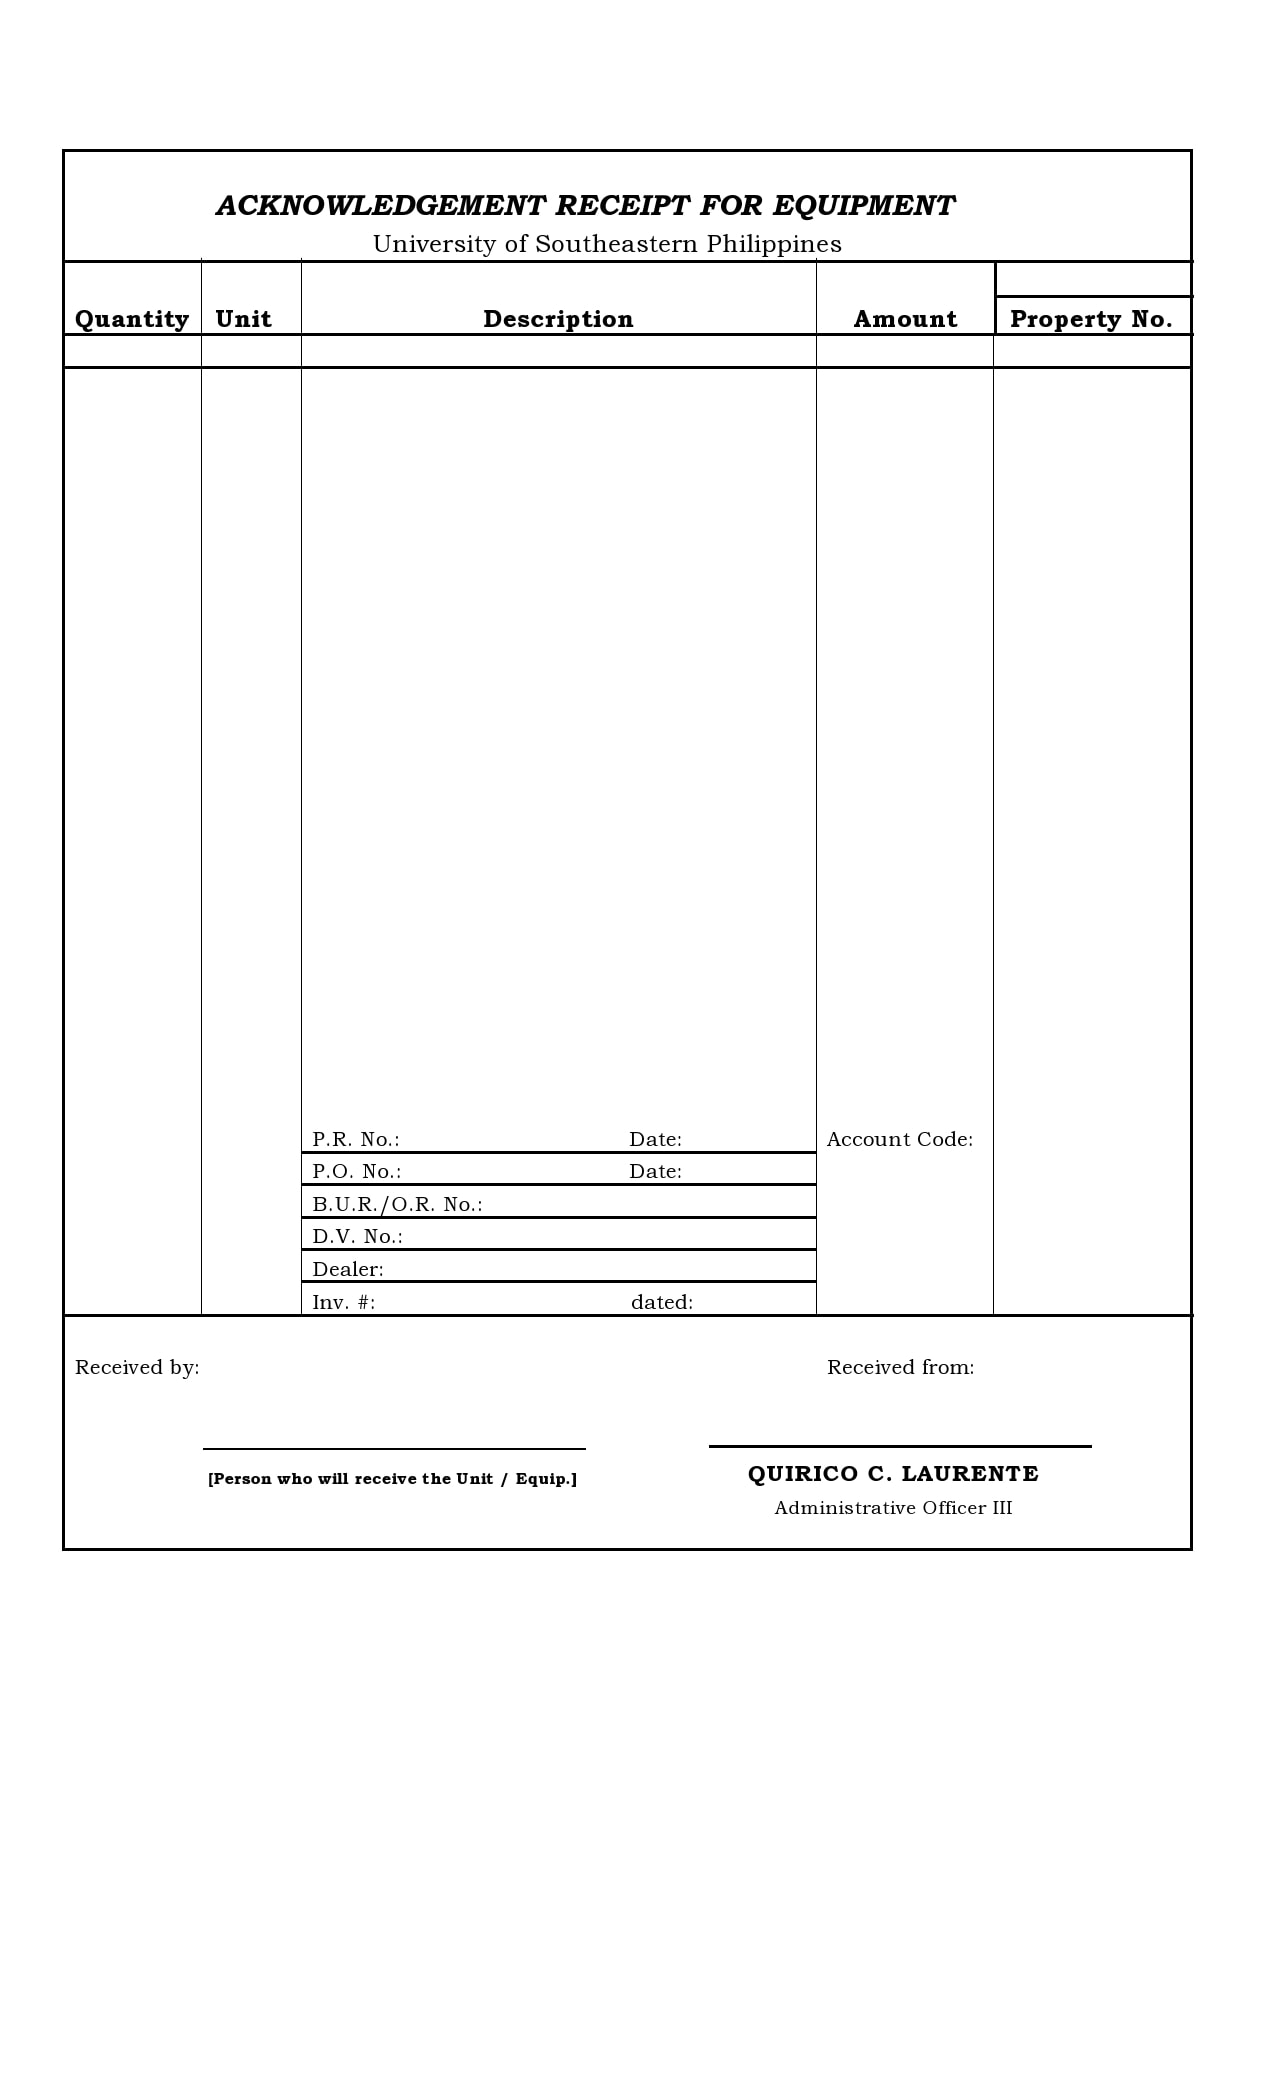 Sample Template Of Acknowledgement Receipt